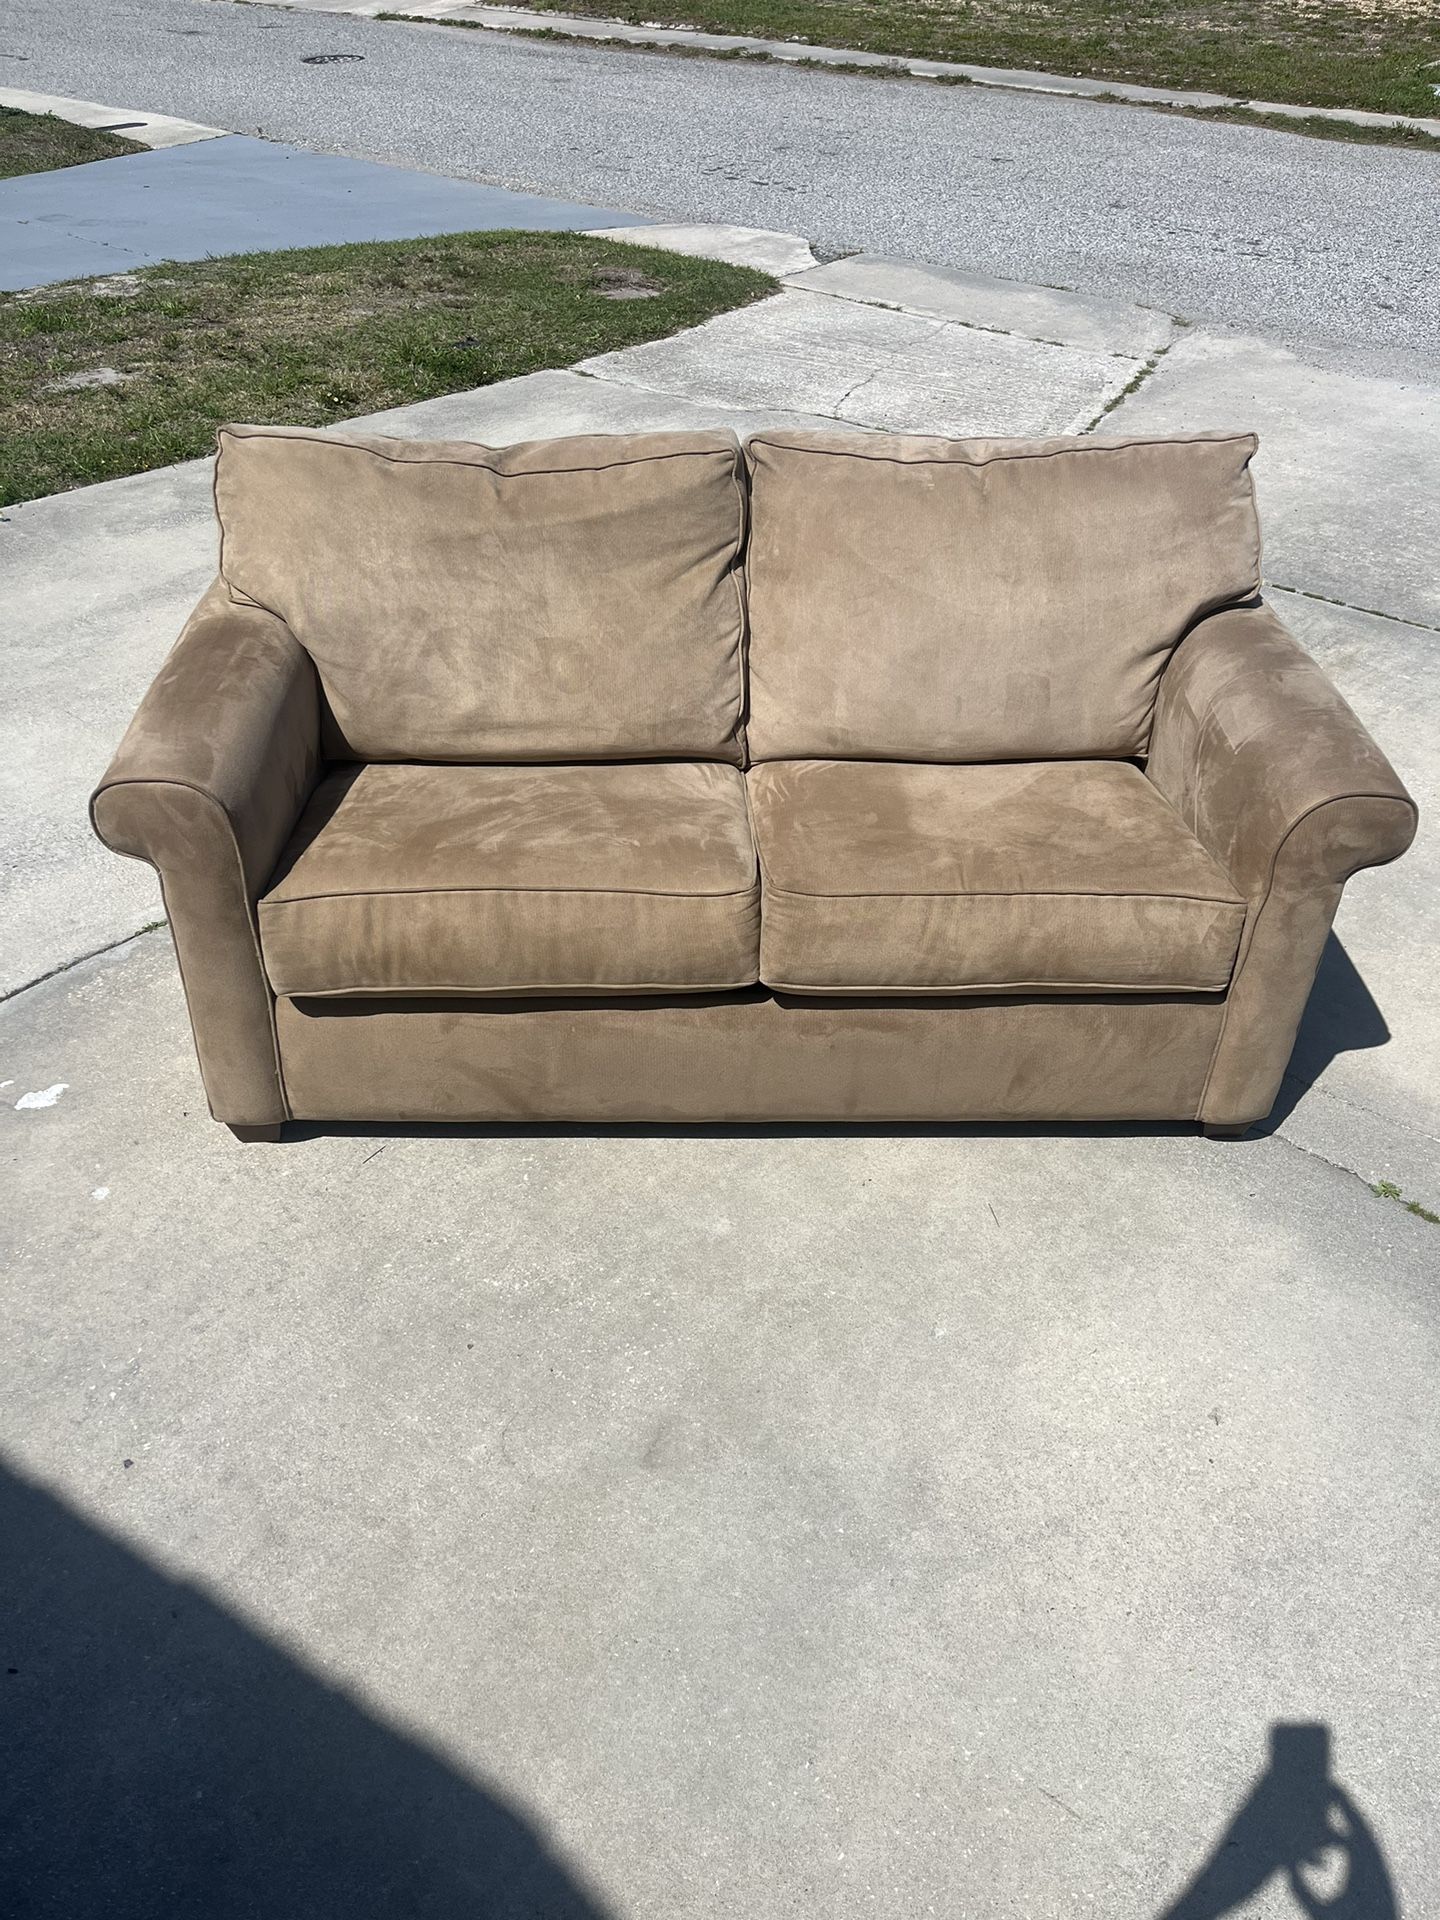 Sleeper Sofa And Ottoman With Free Delivery 